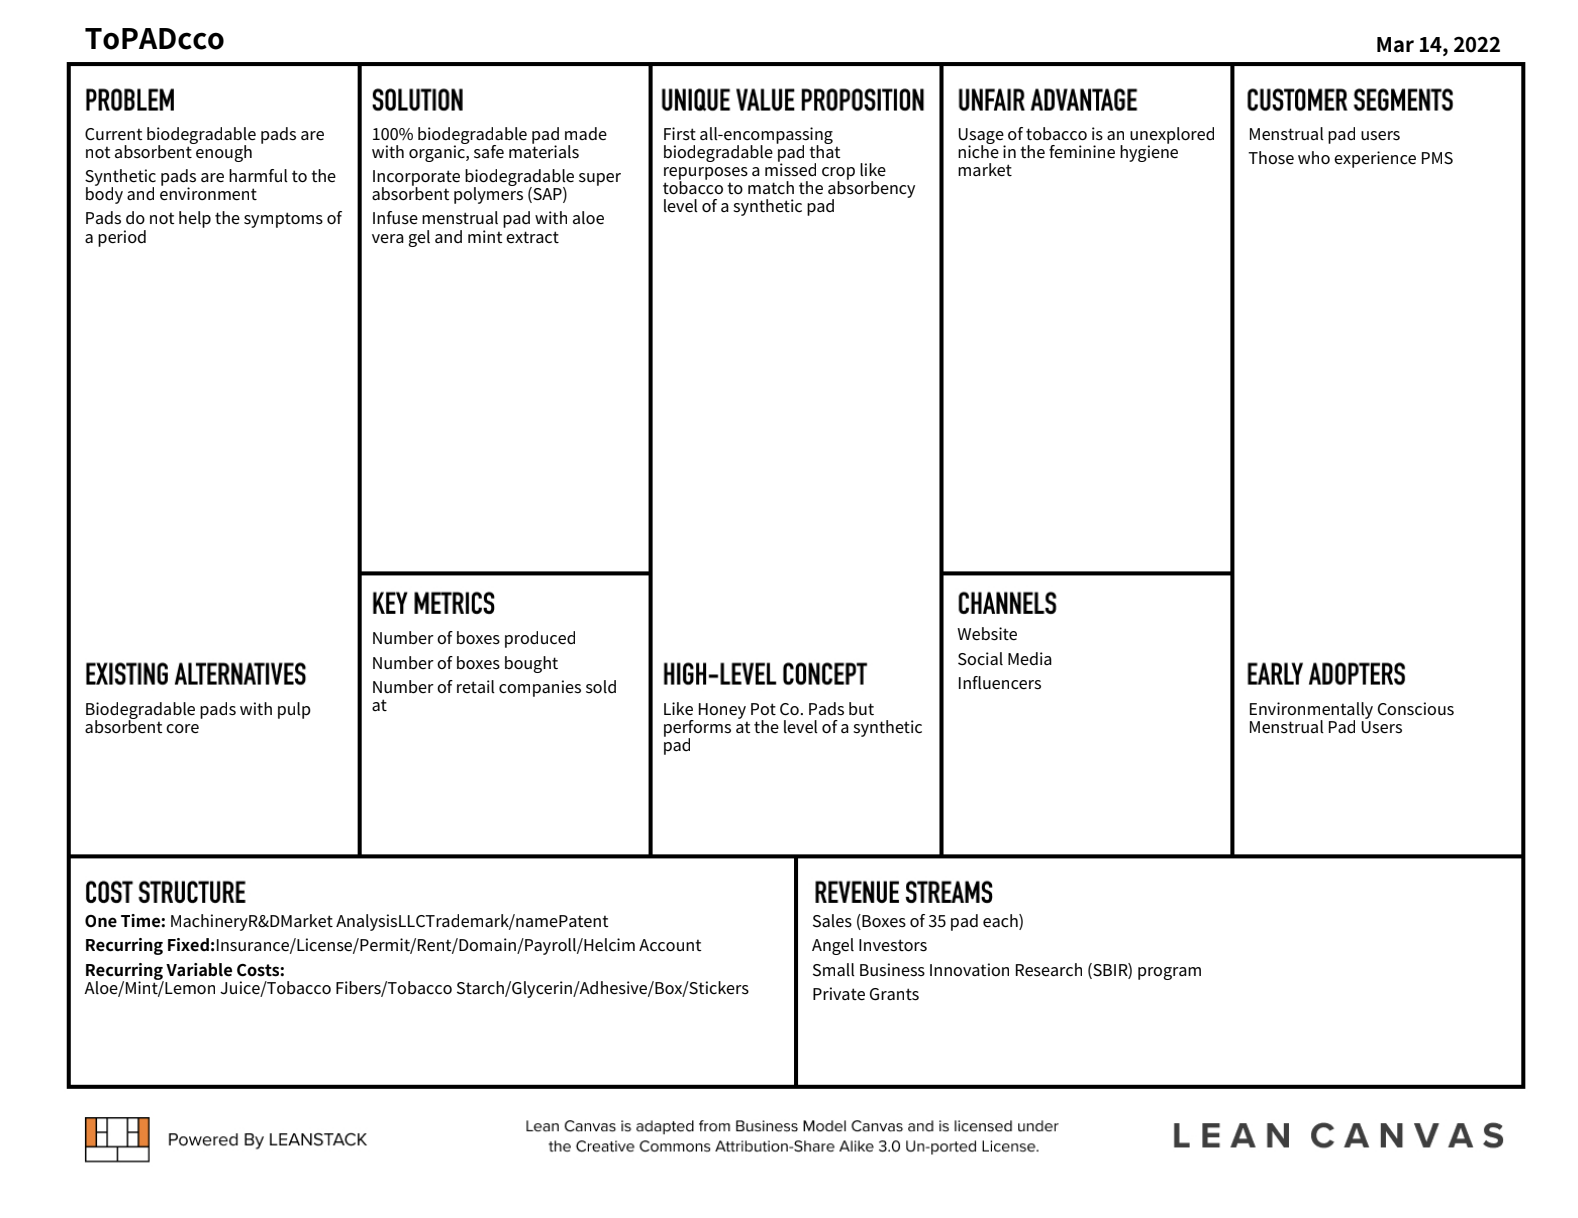 Lean Canvas Template & Example Project - Milanote